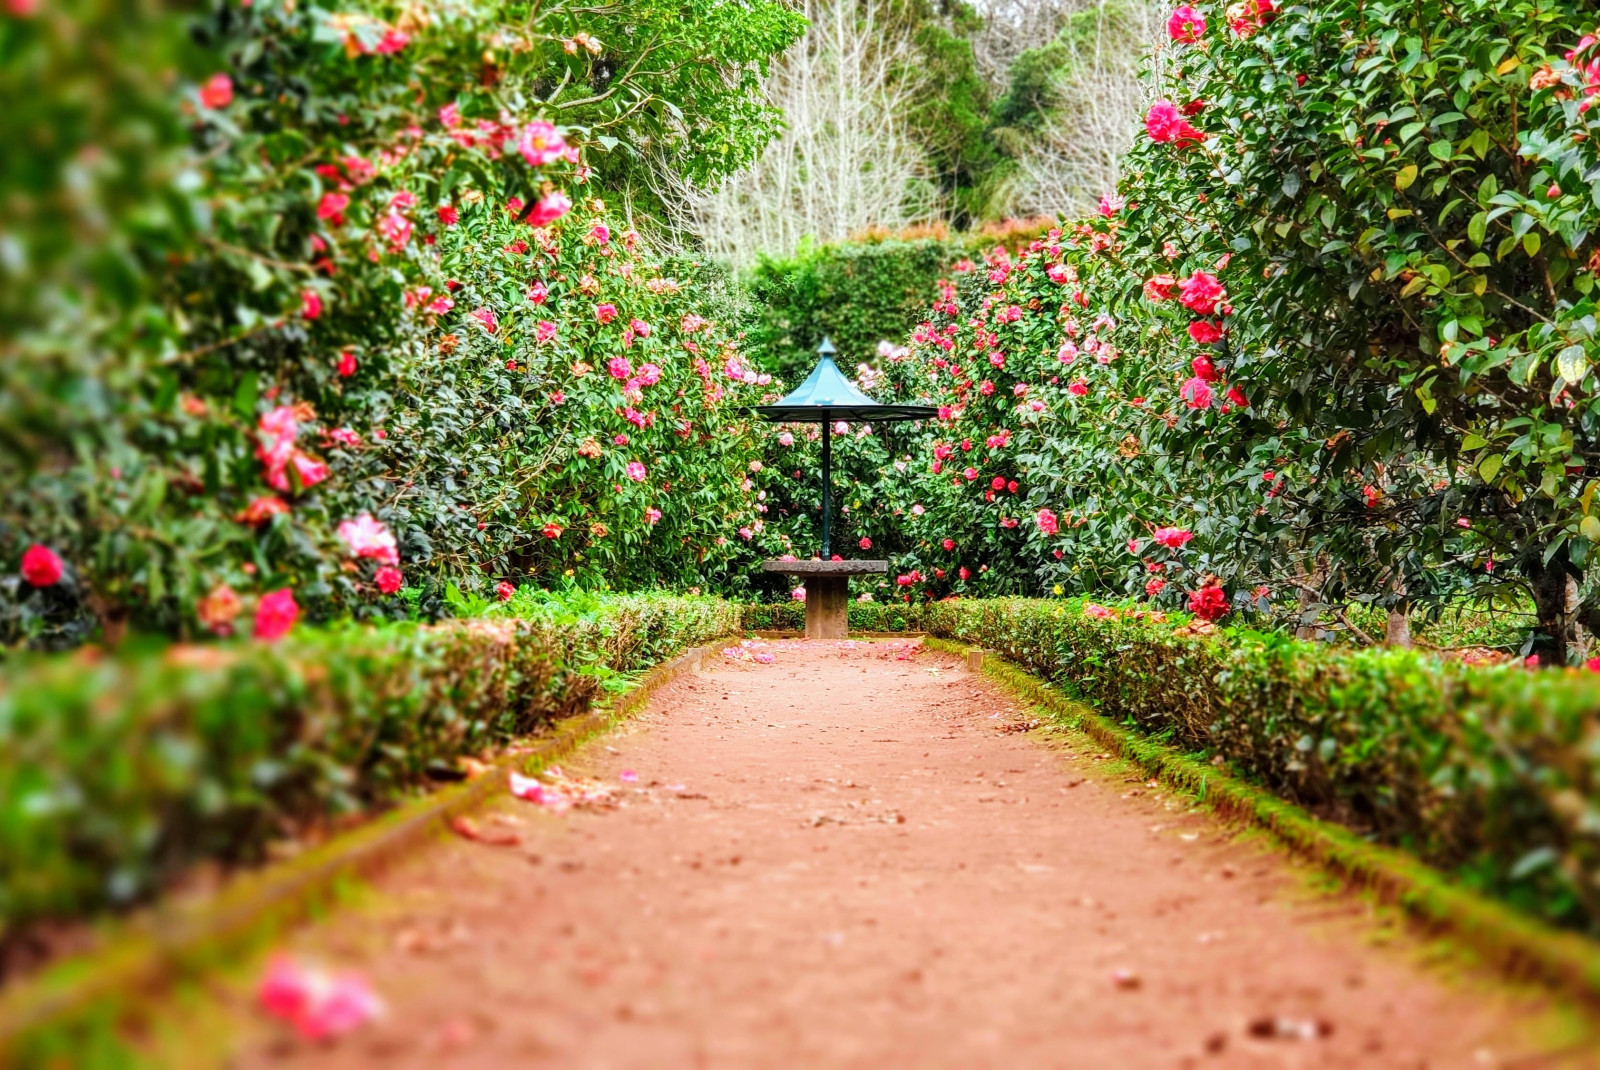 Dirt path surrounded by green foliage and pink flowers